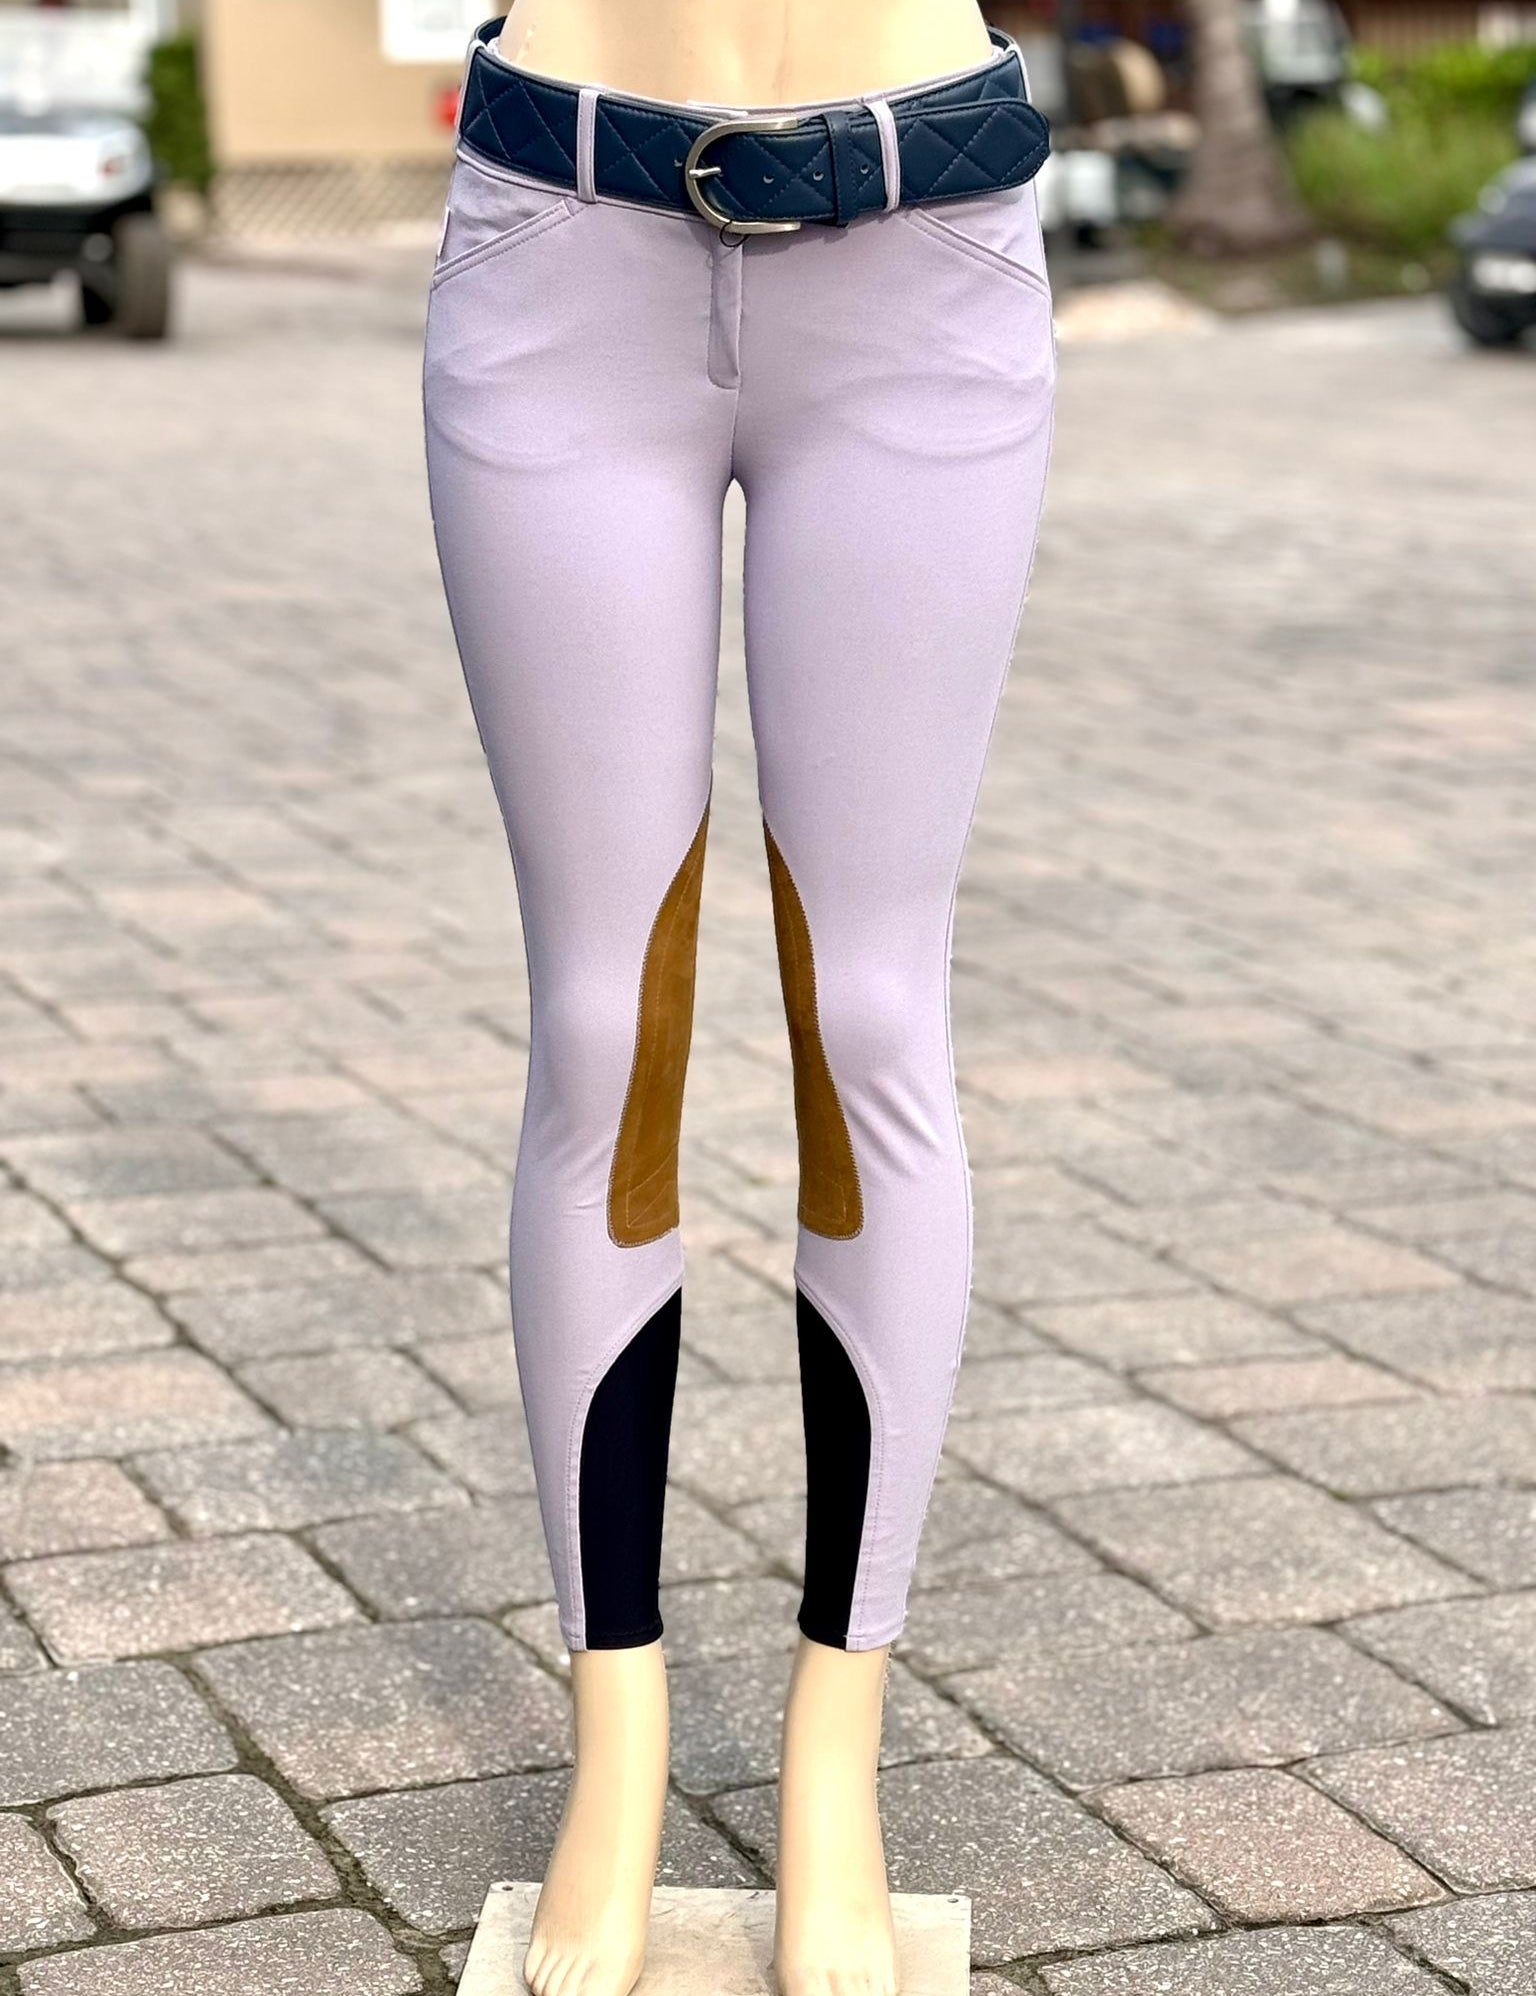 Tailored Sportsman Boot Sock Breeches: Mid Rise, Front Zip Colors Sizes 28-36